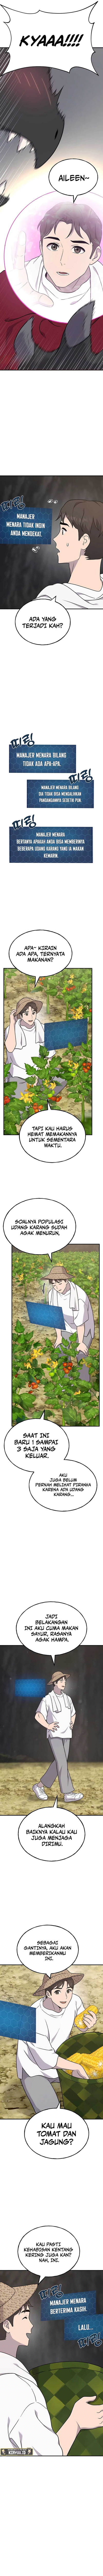 Solo Farming In The Tower Chapter 45